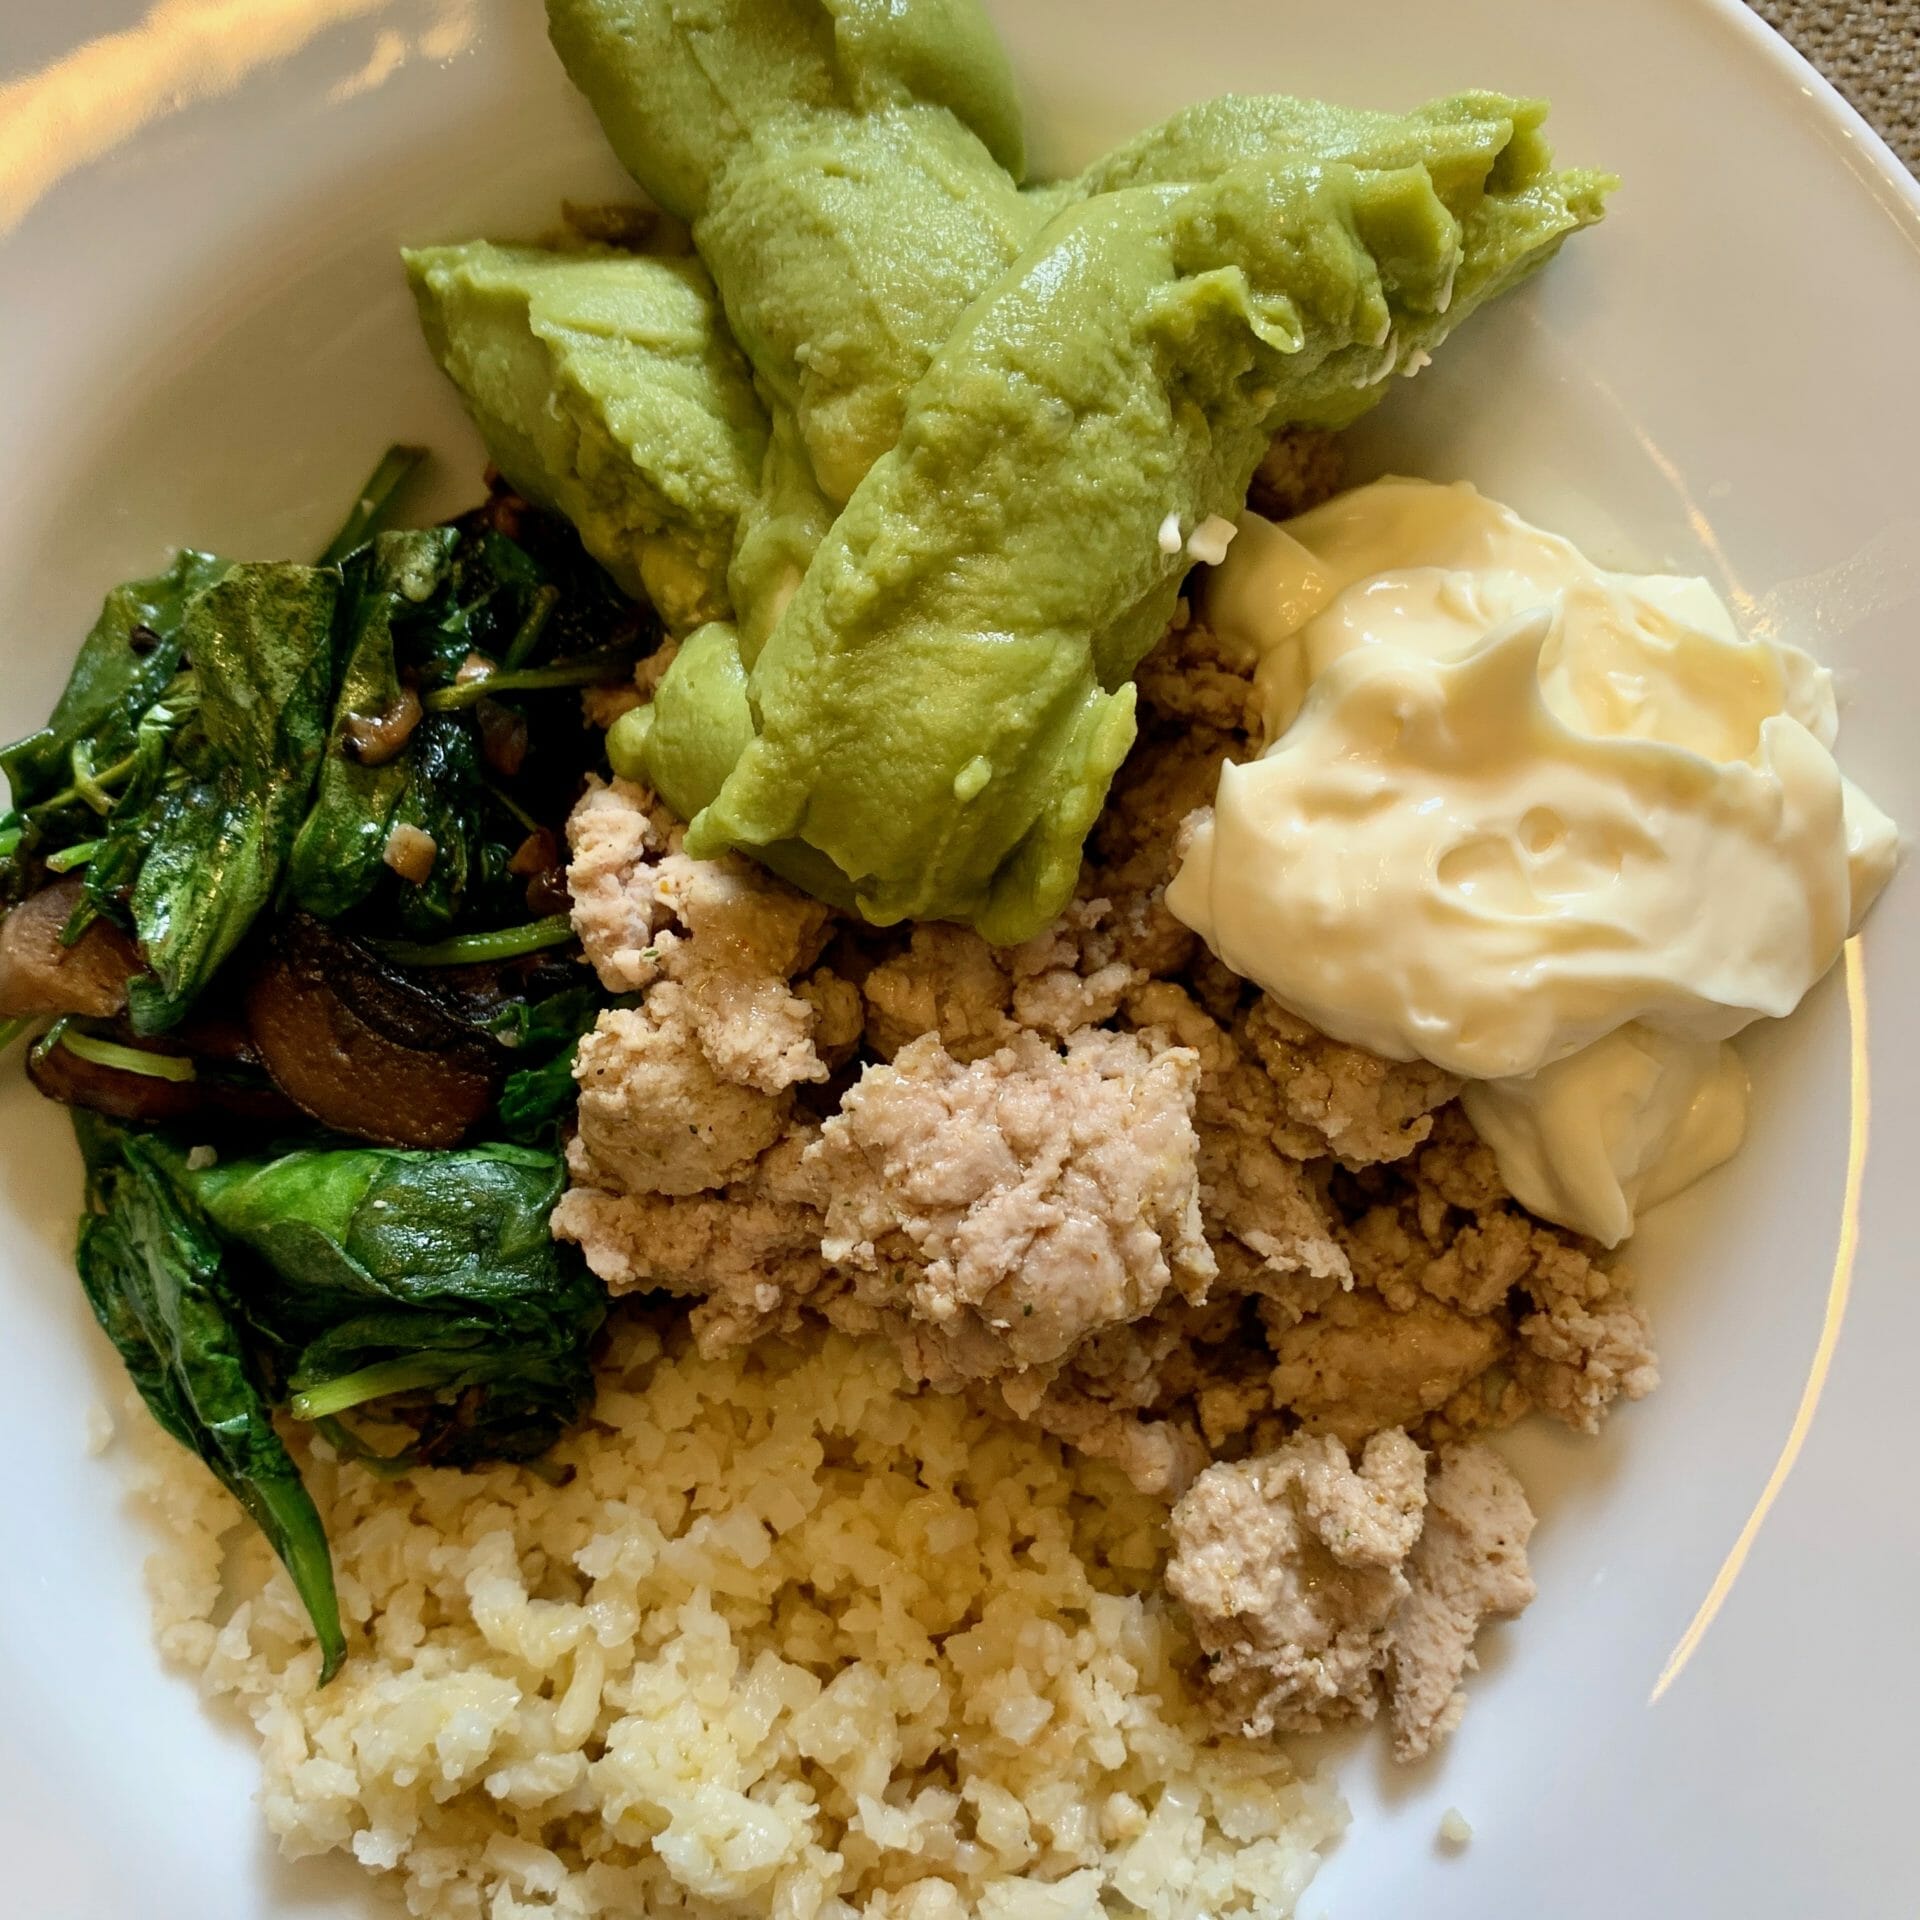 Ground turkey, riced cauliflower, spinach and mushrooms. Topped with mayo and guacamole